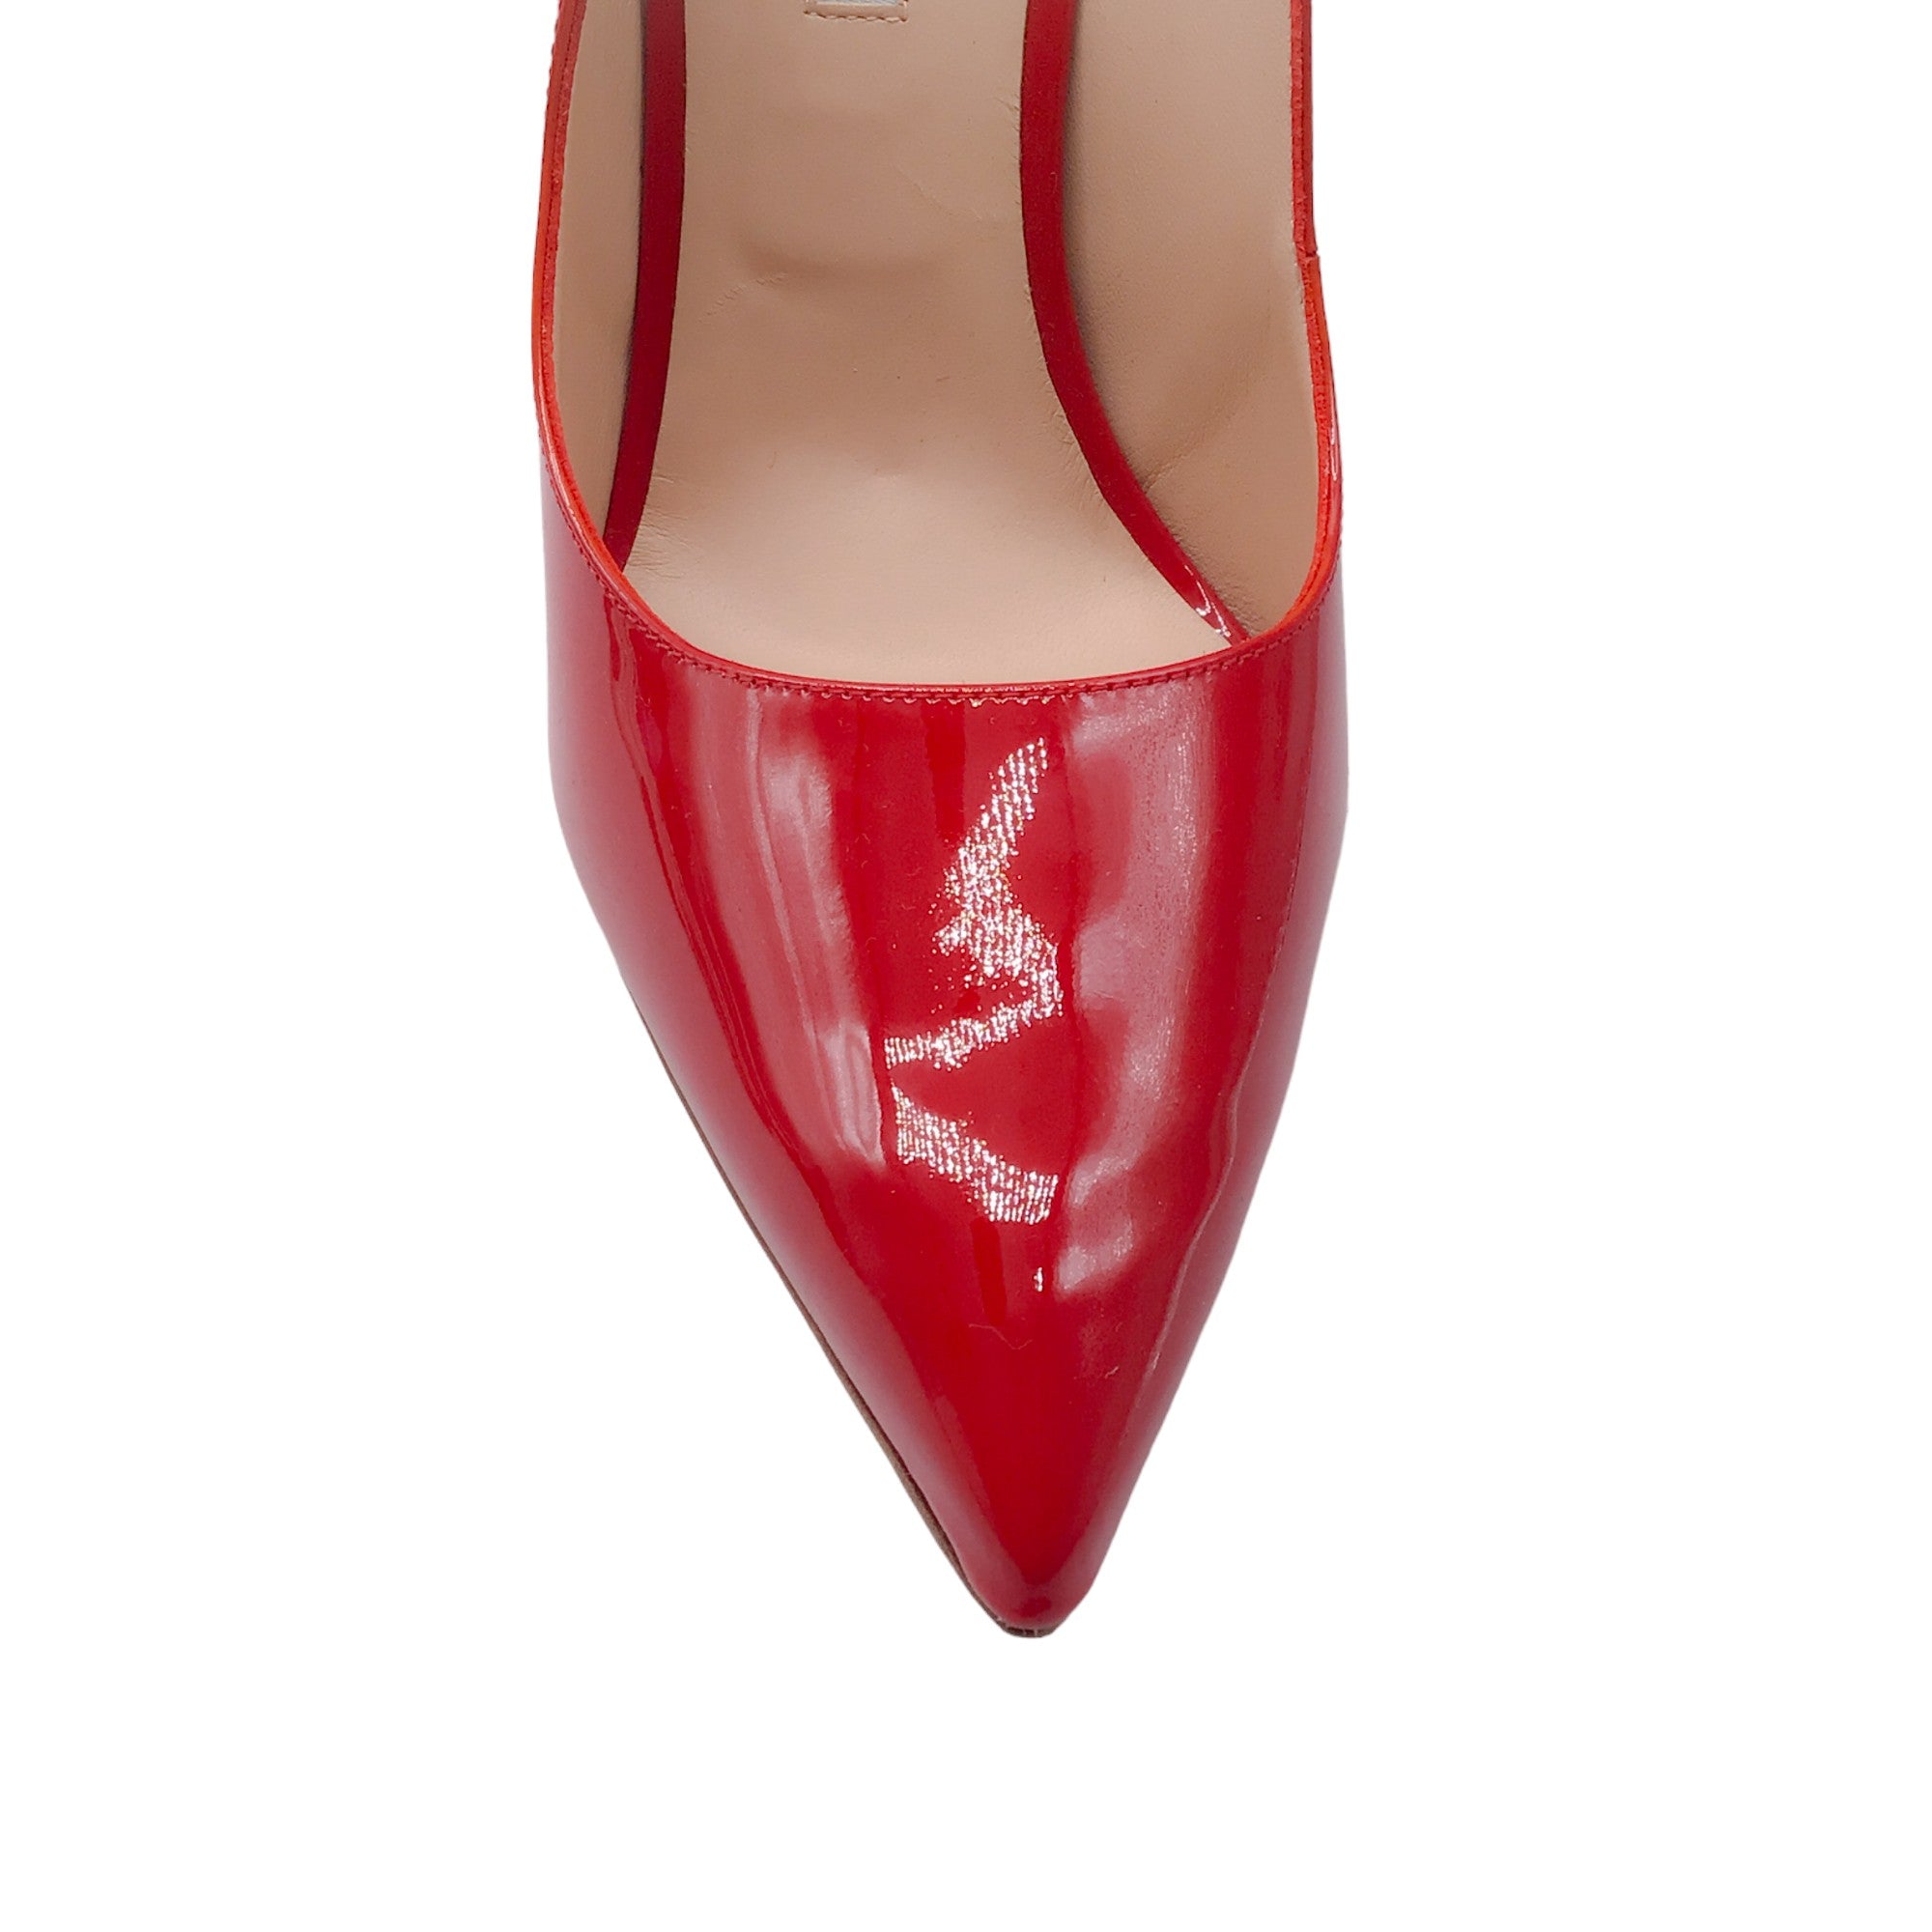 Kendall Miles Red Patent Leather Siren Pump